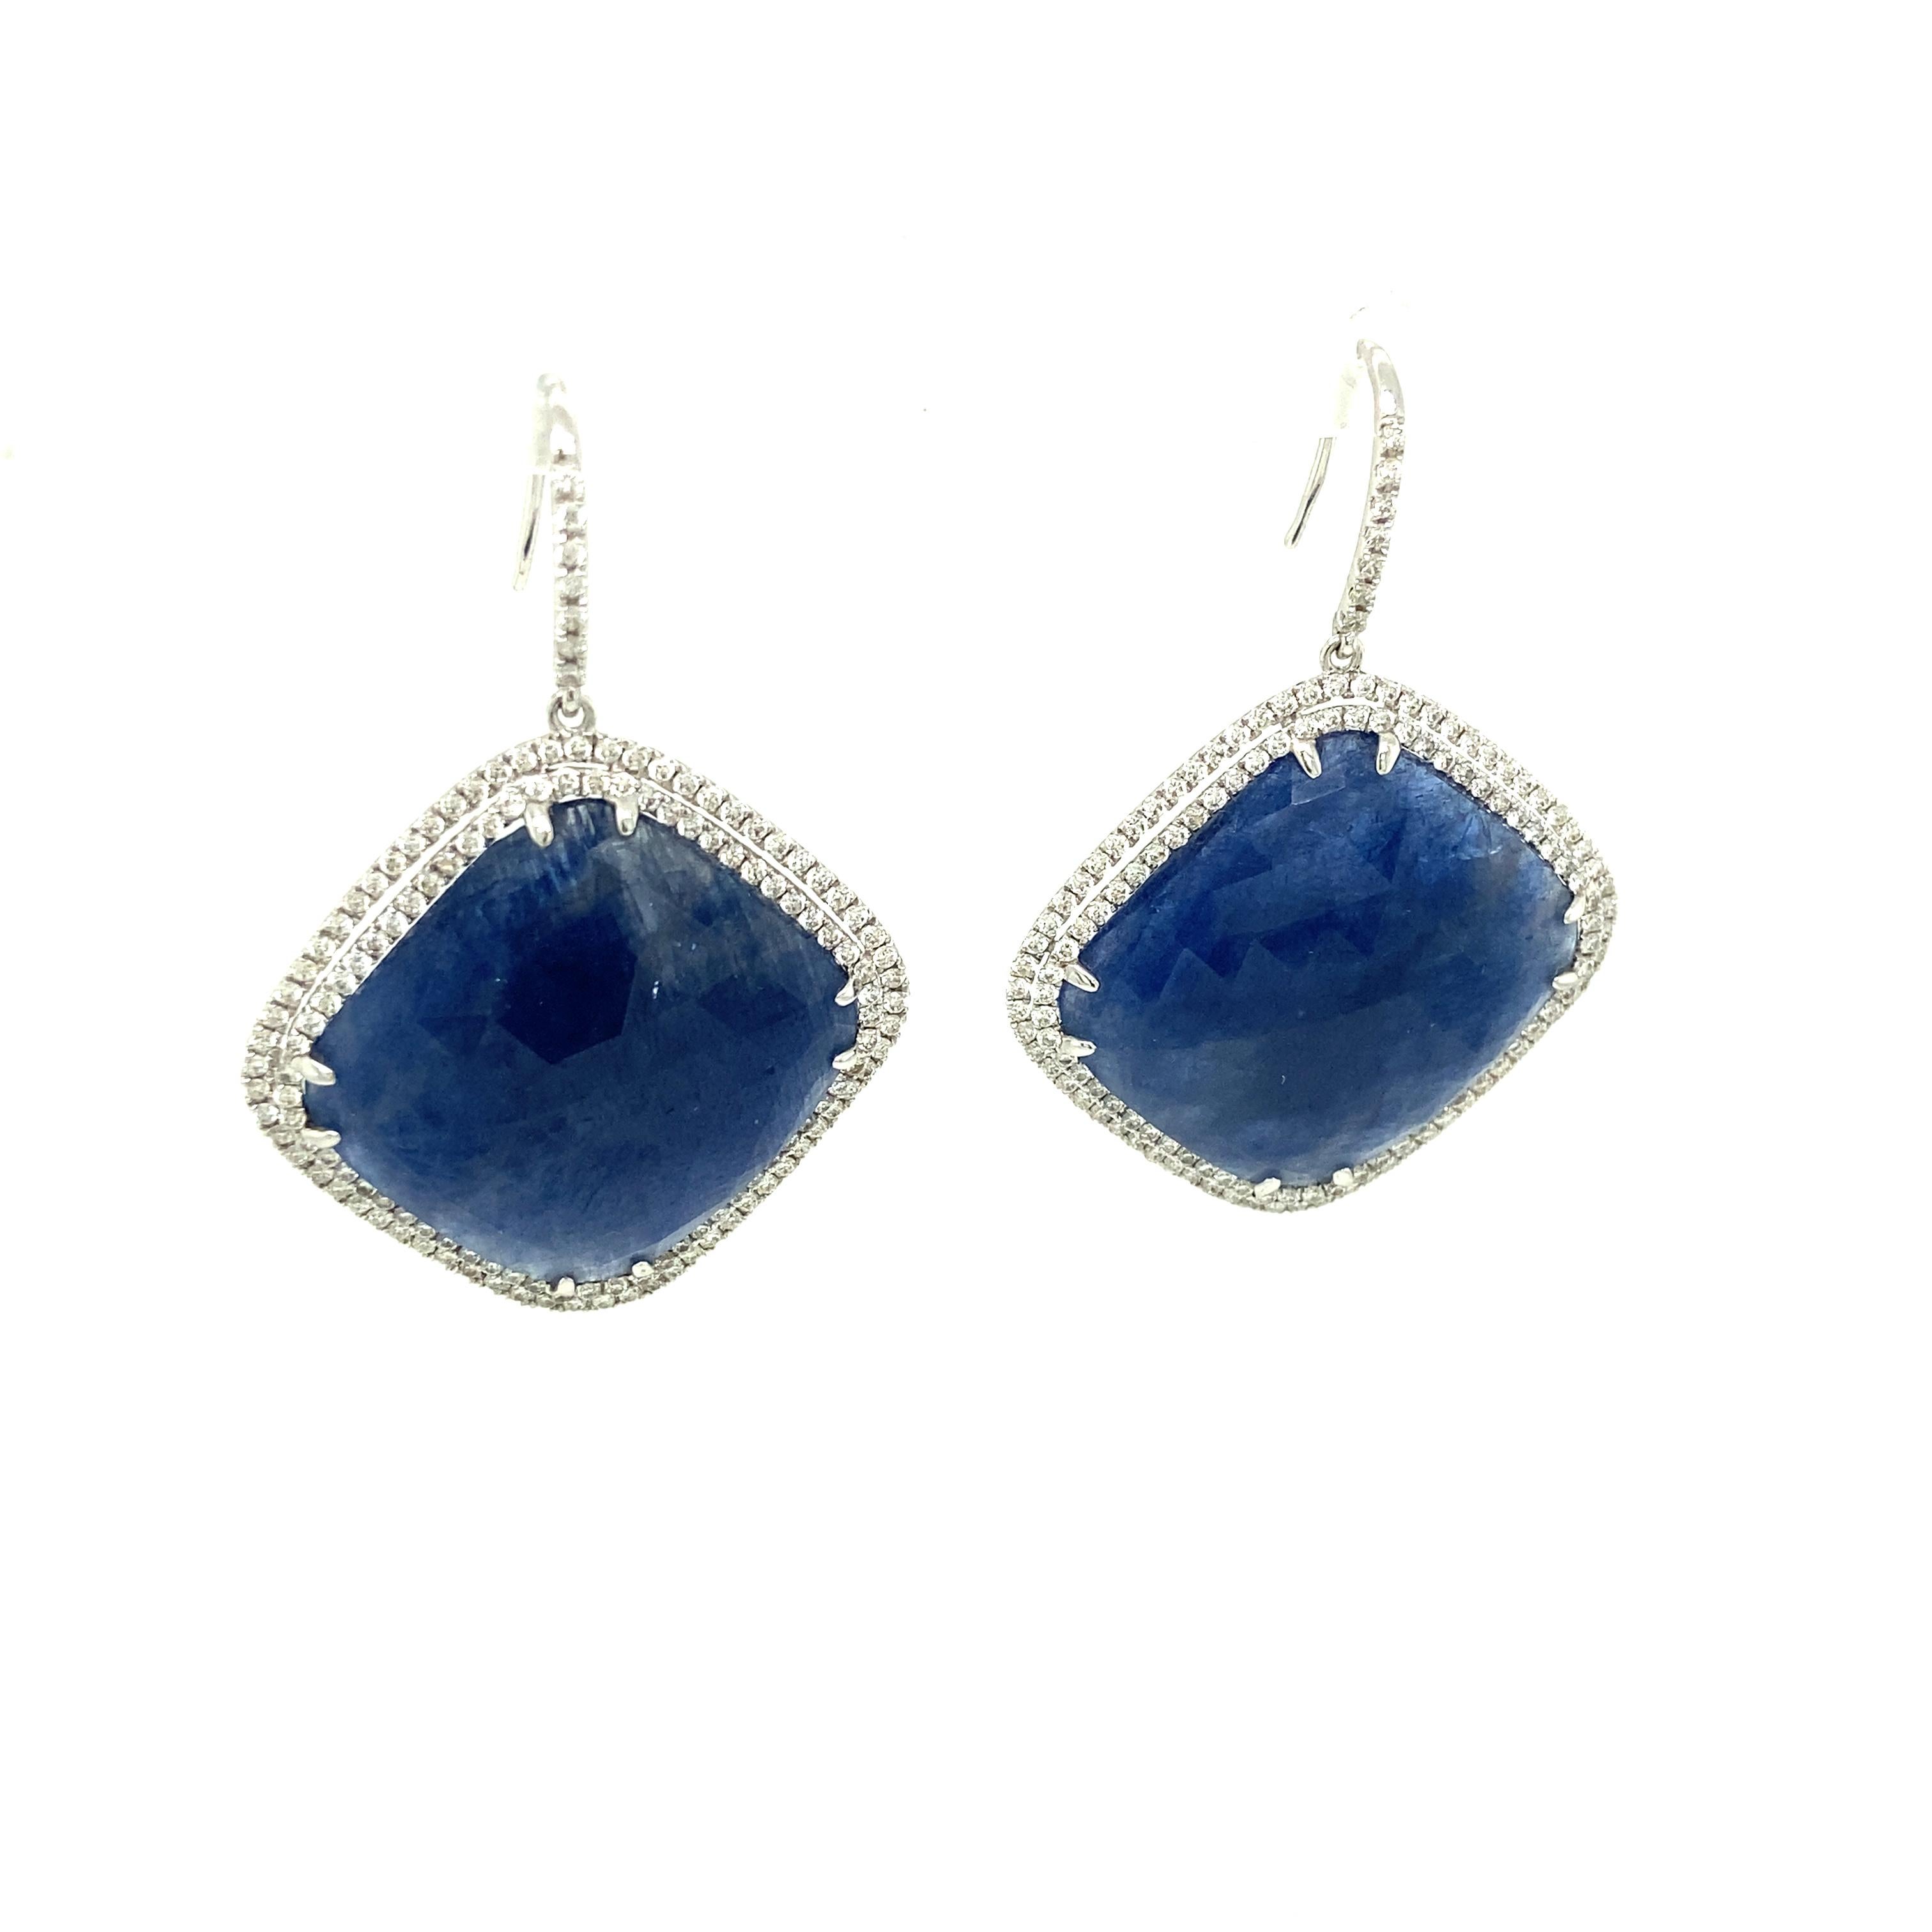 Contemporary 52.55 Carat GRS Certified Unheated Burmese Blue Sapphire and Diamond Earrings For Sale